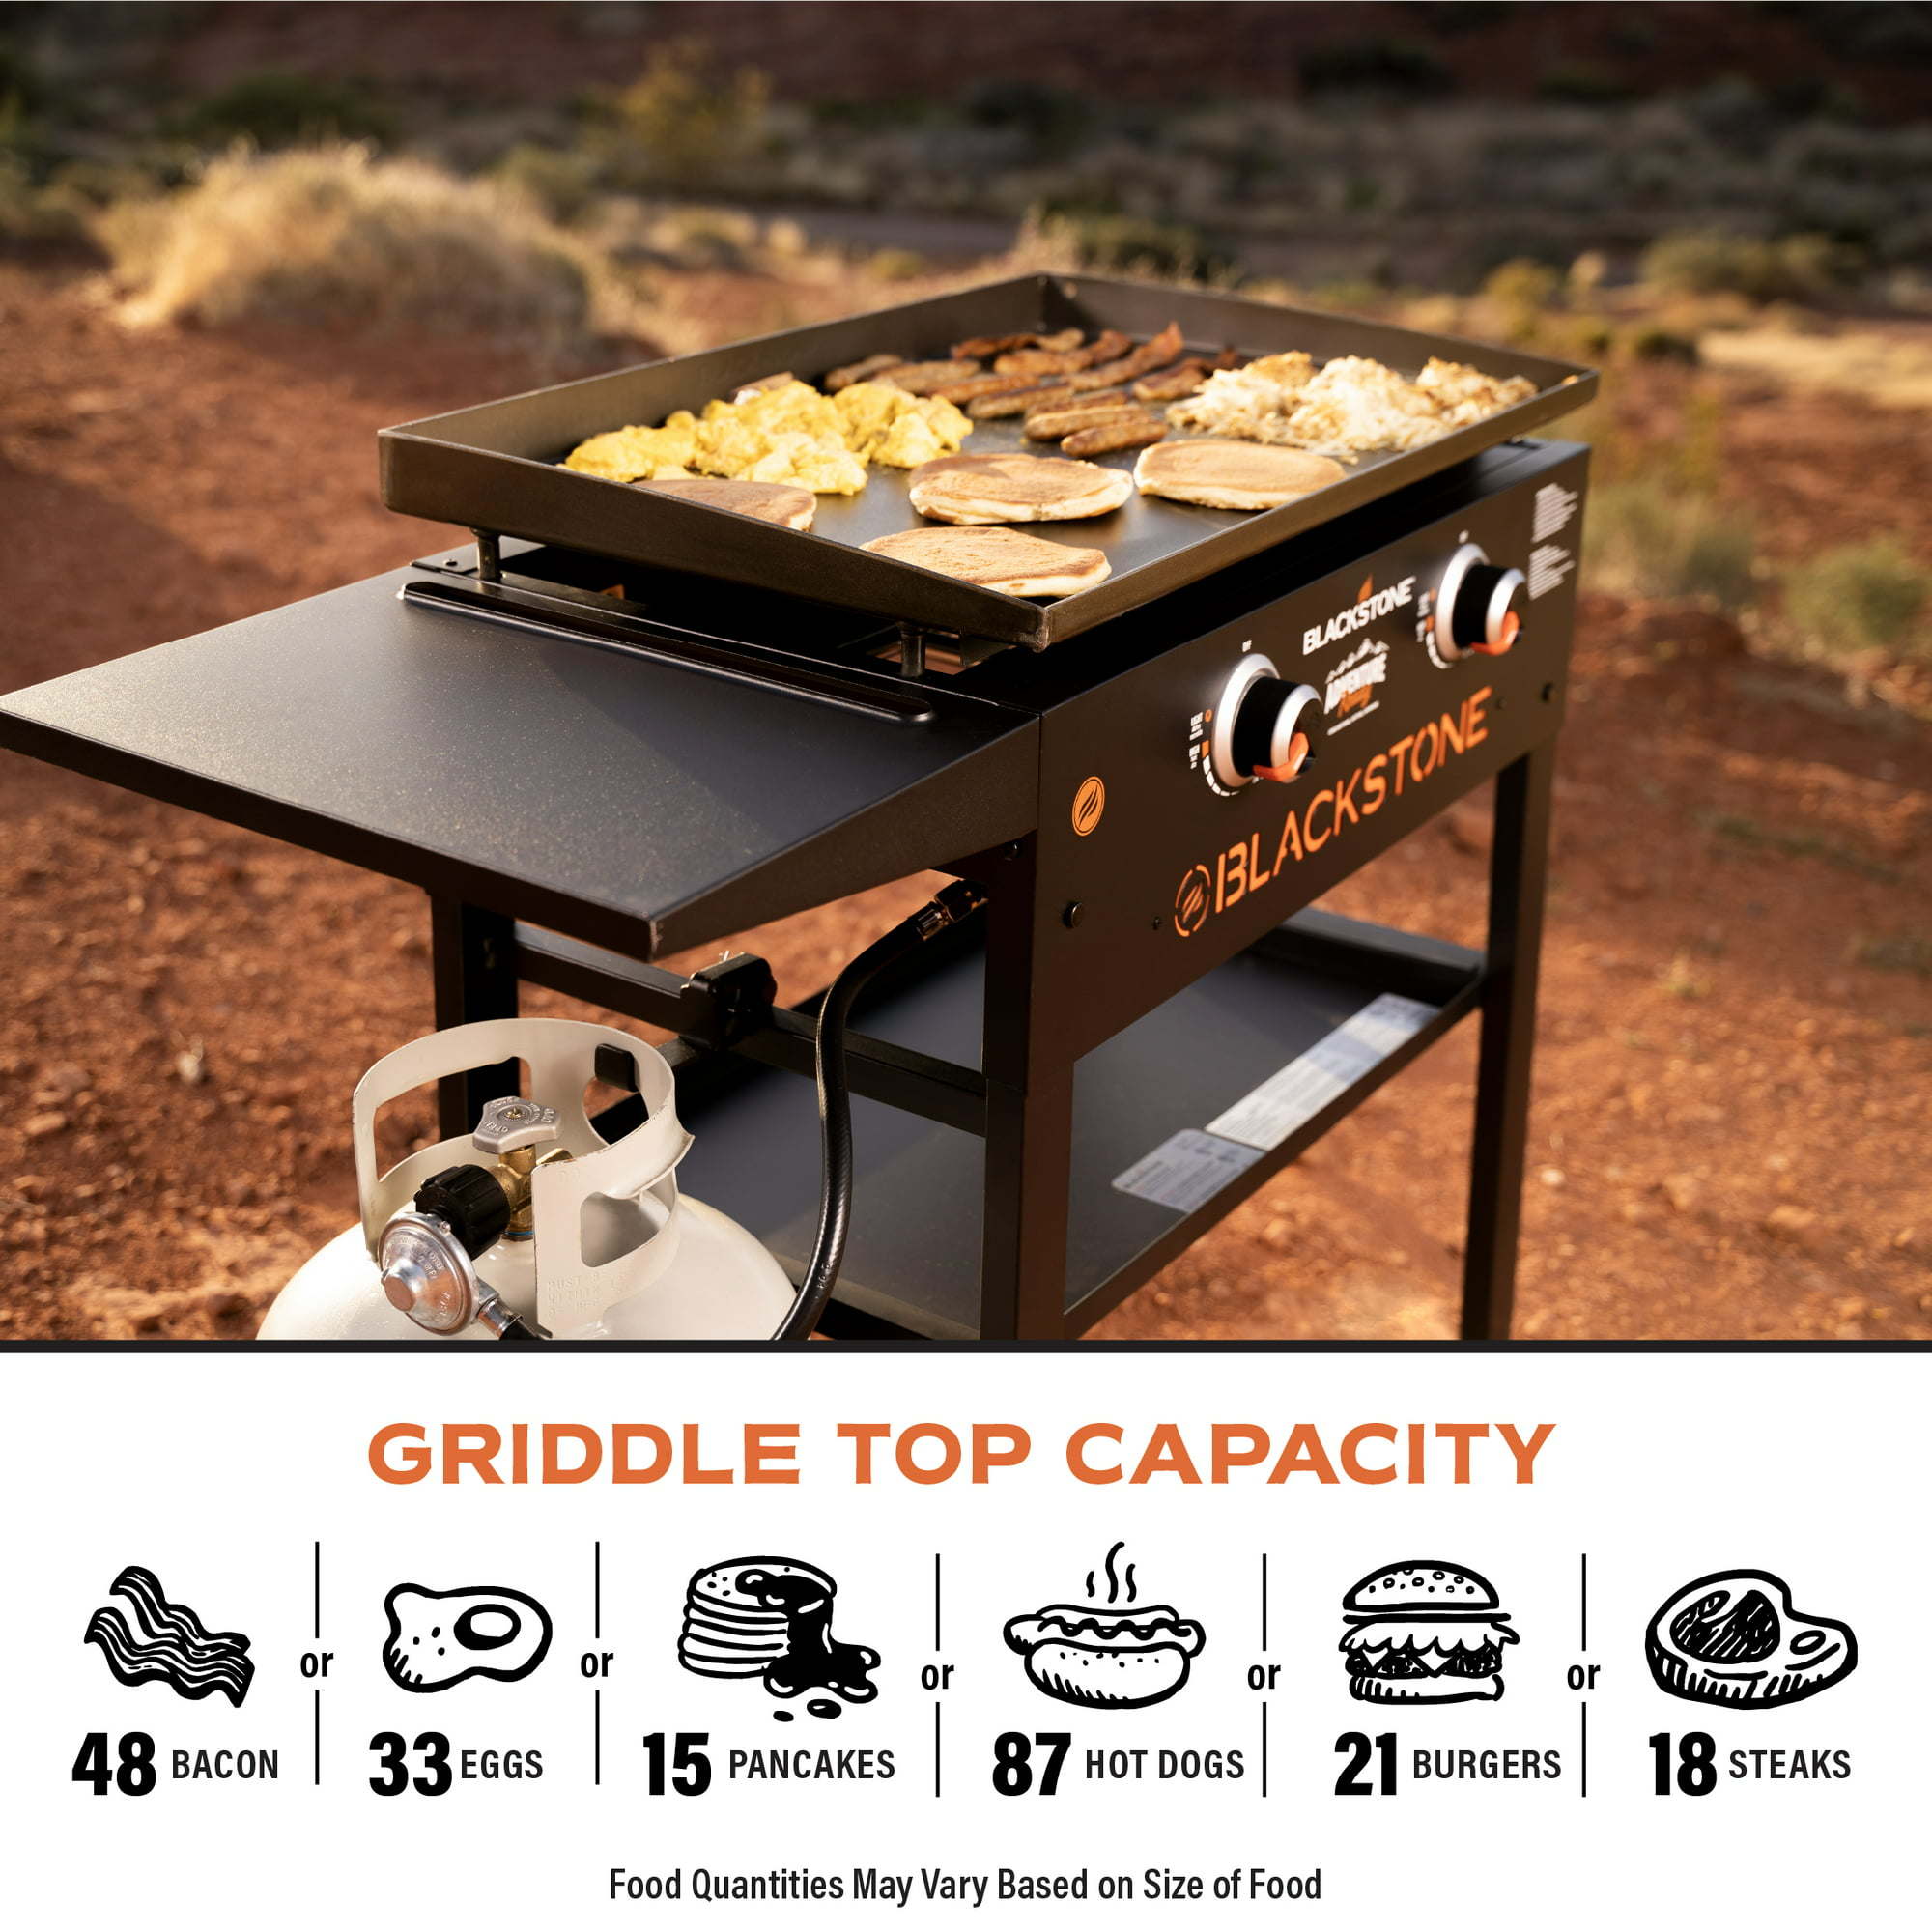 Close-up of an Adventure Ready 2-Burner 28" Griddle Cooking Station connected to a propane tank with a side shelf, illuminated by warm sunlight.